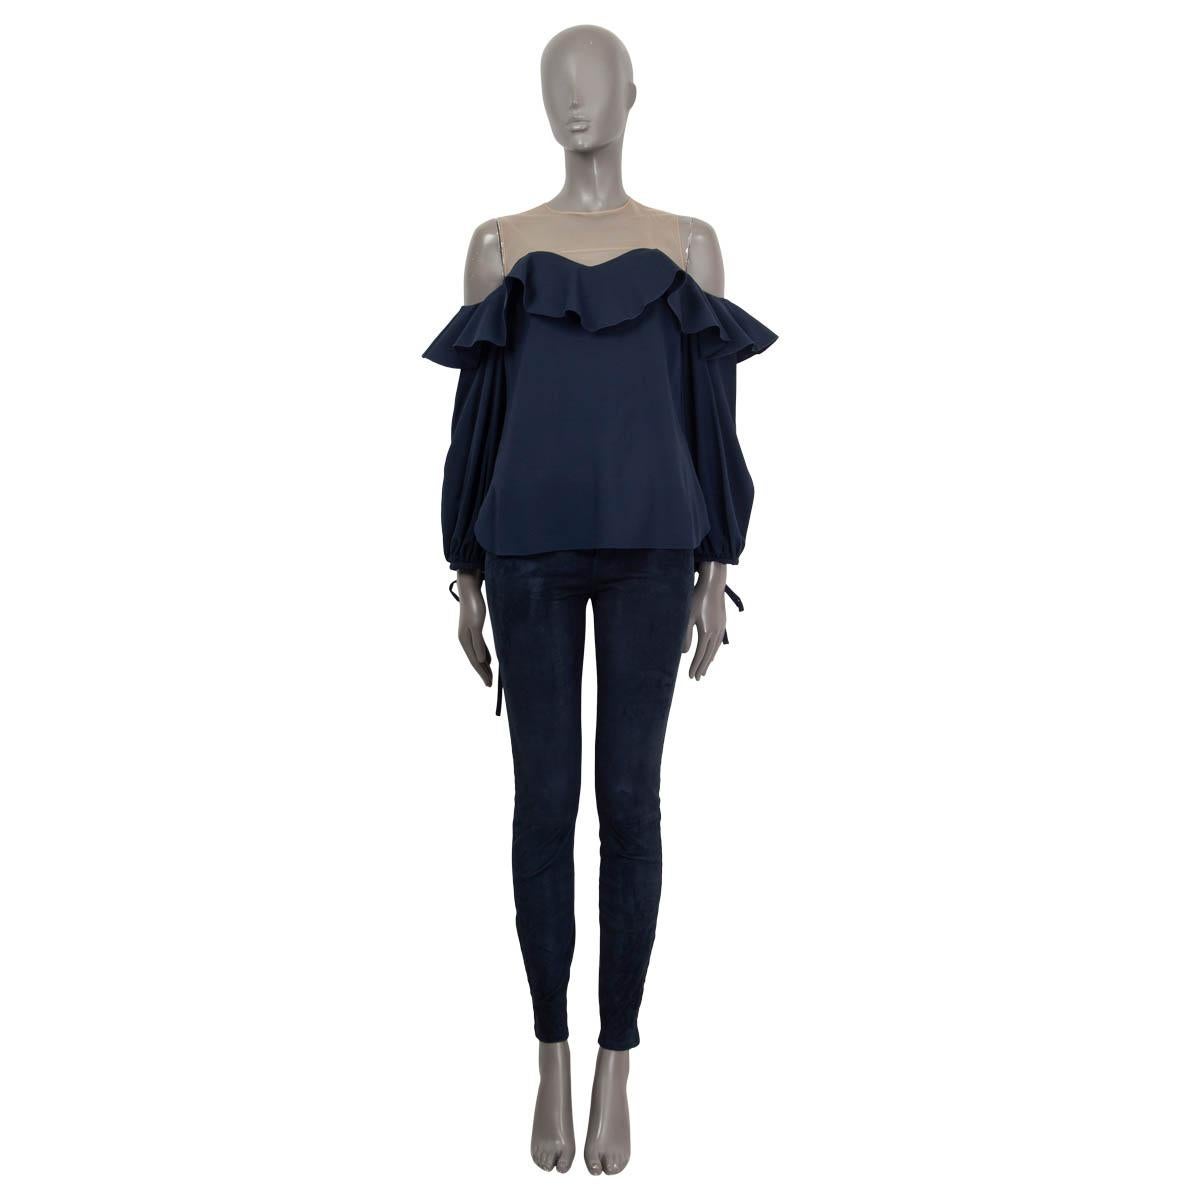 100% authentic Oscar De La Renta cut out blouse in navy blue silk (95%) and lycra (5%). Features ruffle embellishments and laced cuffs. Opens with a hook at the back. Unlined. Has been worn and is in excellent condition. 

Measurements
Tag